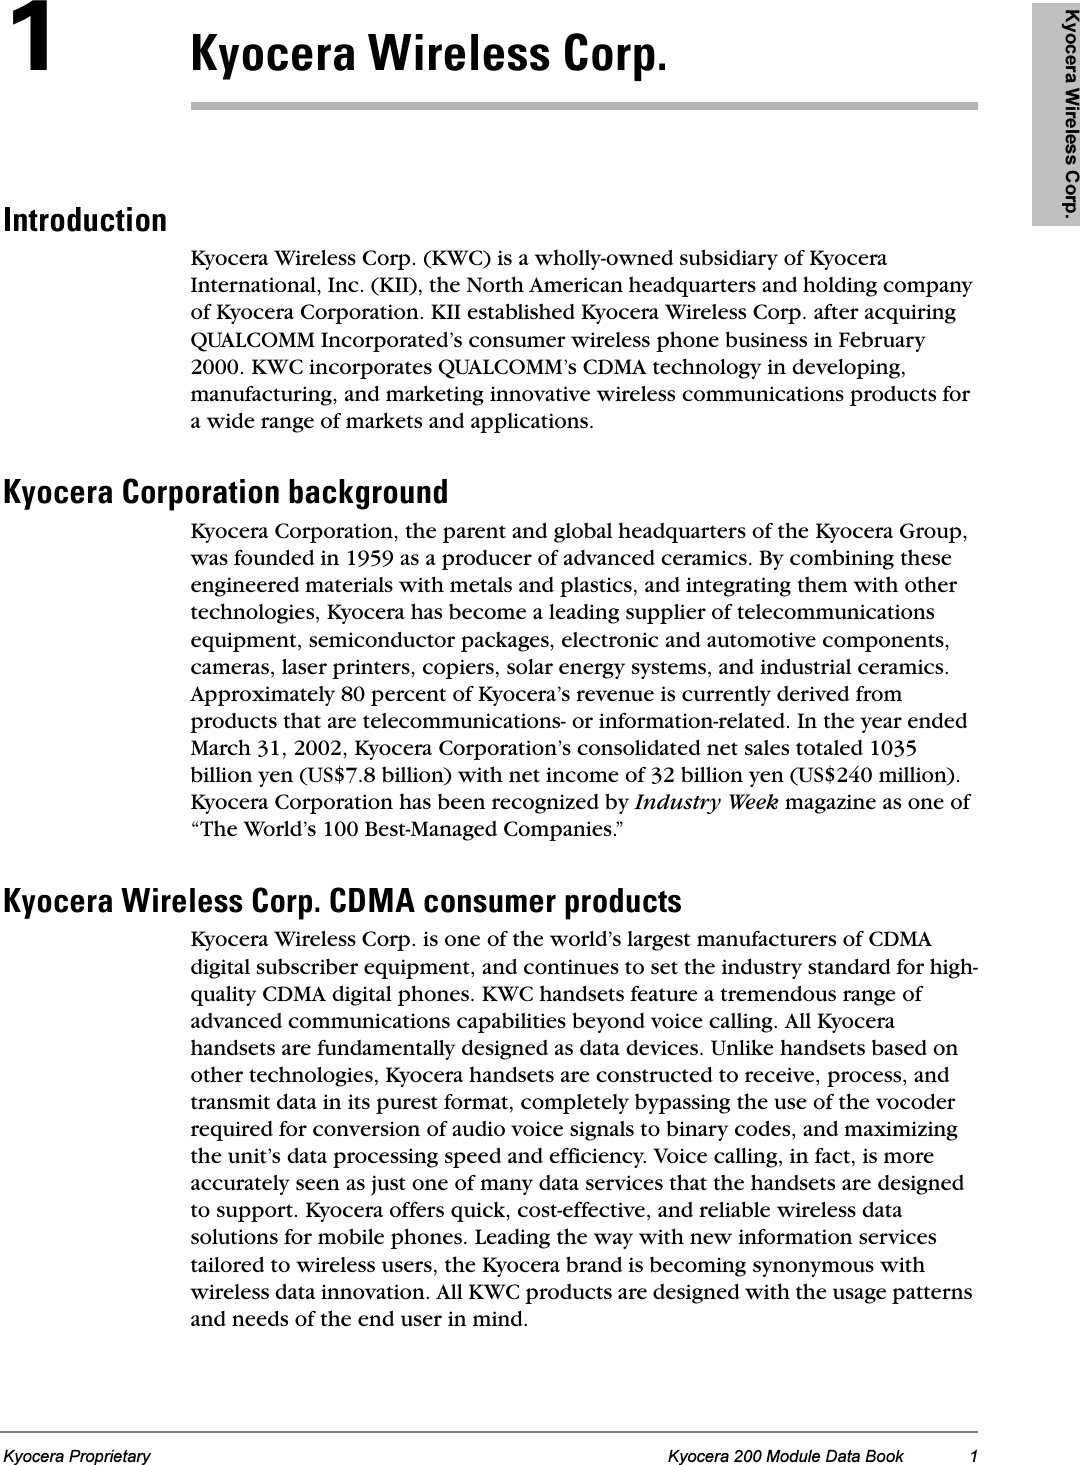 Kyocera Wireless Corp. Kyocera Wireless Corp. Kyocera Wireless Corp. Kyocera Wireless Corp. Kyocera Wireless Corp.Kyocera Proprietary Kyocera 200 Module Data Book 1NhóçÅÉê~=táêÉäÉëë=`çêéKfåíêçÇìÅíáçåKyocera Wireless Corp. (KWC) is a wholly-owned subsidiary of Kyocera International, Inc. (KII), the North American headquarters and holding company of Kyocera Corporation. KII established Kyocera Wireless Corp. after acquiring QUALCOMM Incorporated’s consumer wireless phone business in February 2000. KWC incorporates QUALCOMM’s CDMA technology in developing, manufacturing, and marketing innovative wireless communications products for a wide range of markets and applications.hóçÅÉê~=`çêéçê~íáçå=Ä~ÅâÖêçìåÇKyocera Corporation, the parent and global headquarters of the Kyocera Group, was founded in 1959 as a producer of advanced ceramics. By combining these engineered materials with metals and plastics, and integrating them with other technologies, Kyocera has become a leading supplier of telecommunications equipment, semiconductor packages, electronic and automotive components, cameras, laser printers, copiers, solar energy systems, and industrial ceramics. Approximately 80 percent of Kyocera’s revenue is currently derived from products that are telecommunications- or information-related. In the year ended March 31, 2002, Kyocera Corporation’s consolidated net sales totaled 1035 billion yen (US$7.8 billion) with net income of 32 billion yen (US$240 million). Kyocera Corporation has been recognized by Industry Week magazine as one of “The World’s 100 Best-Managed Companies.”hóçÅÉê~=táêÉäÉëë=`çêéK=`aj^=ÅçåëìãÉê=éêçÇìÅíëKyocera Wireless Corp. is one of the world’s largest manufacturers of CDMA digital subscriber equipment, and continues to set the industry standard for high-quality CDMA digital phones. KWC handsets feature a tremendous range of advanced communications capabilities beyond voice calling. All Kyocera handsets are fundamentally designed as data devices. Unlike handsets based on other technologies, Kyocera handsets are constructed to receive, process, and transmit data in its purest format, completely bypassing the use of the vocoder required for conversion of audio voice signals to binary codes, and maximizing the unit’s data processing speed and efficiency. Voice calling, in fact, is more accurately seen as just one of many data services that the handsets are designed to support. Kyocera offers quick, cost-effective, and reliable wireless data solutions for mobile phones. Leading the way with new information services tailored to wireless users, the Kyocera brand is becoming synonymous with wireless data innovation. All KWC products are designed with the usage patterns and needs of the end user in mind.